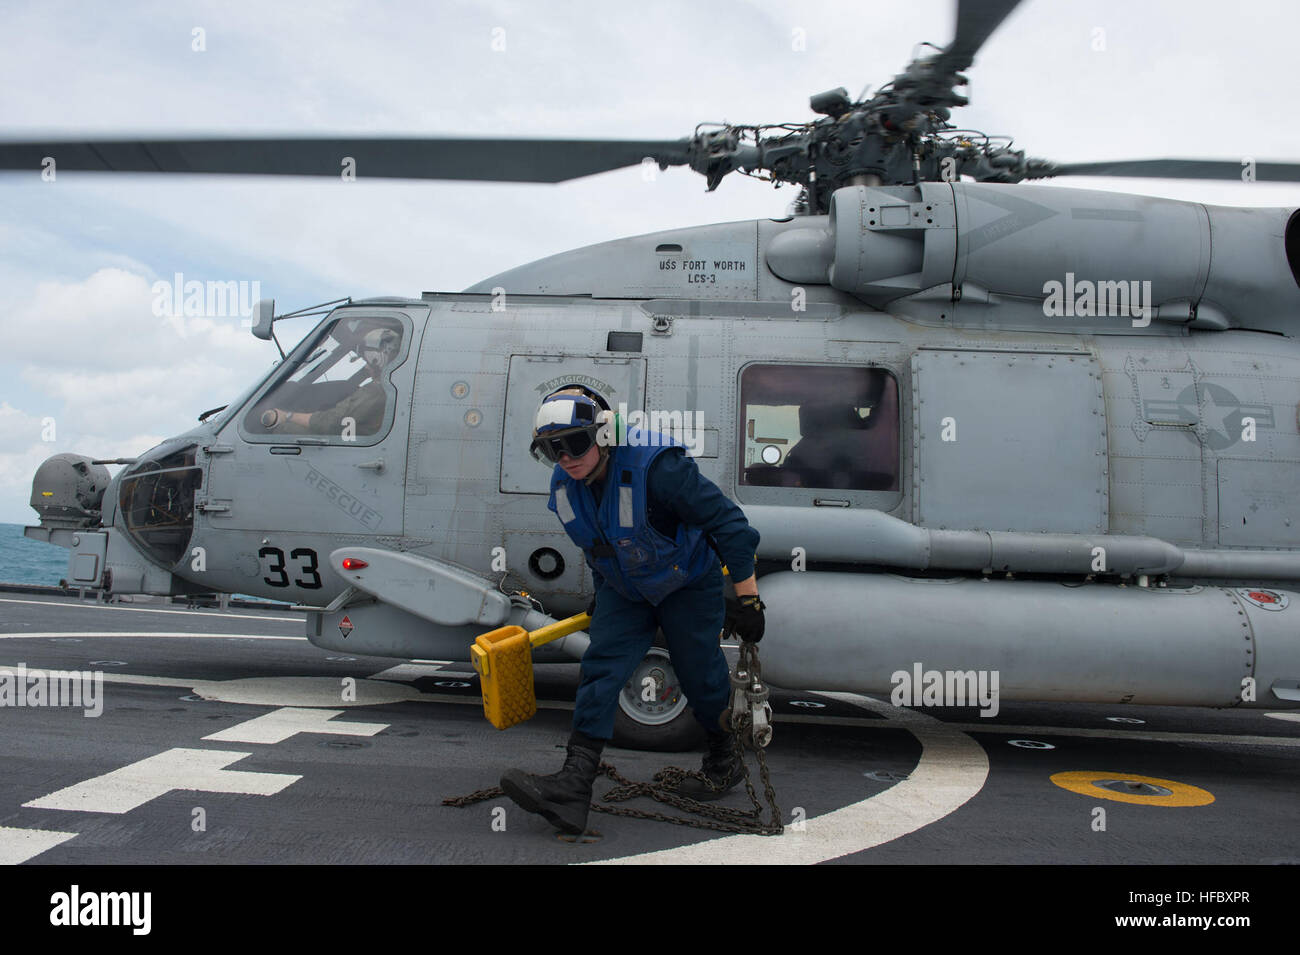 Boatswains Mate 2nd Class James Fitzpatrick removes the chocks and chains on a MH-60R Seahawk helicopter from Helicopter Maritime Strike Squadron 35 on board the littoral combat ship USS Fort Worth (LCS 3). Fort Worth is supporting Indonesian-led search efforts to locate AirAsia Flight QZ8501 and is operating in the vicinity of where the plane’s tail was discovered. (U.S. Navy photo by Mass Communication Specialist 2nd Class Antonio P. Turretto Ramos/Released) Flight operations aboard USS Fort Worth (LCS 3) 150110-N-DC018-130 Stock Photo